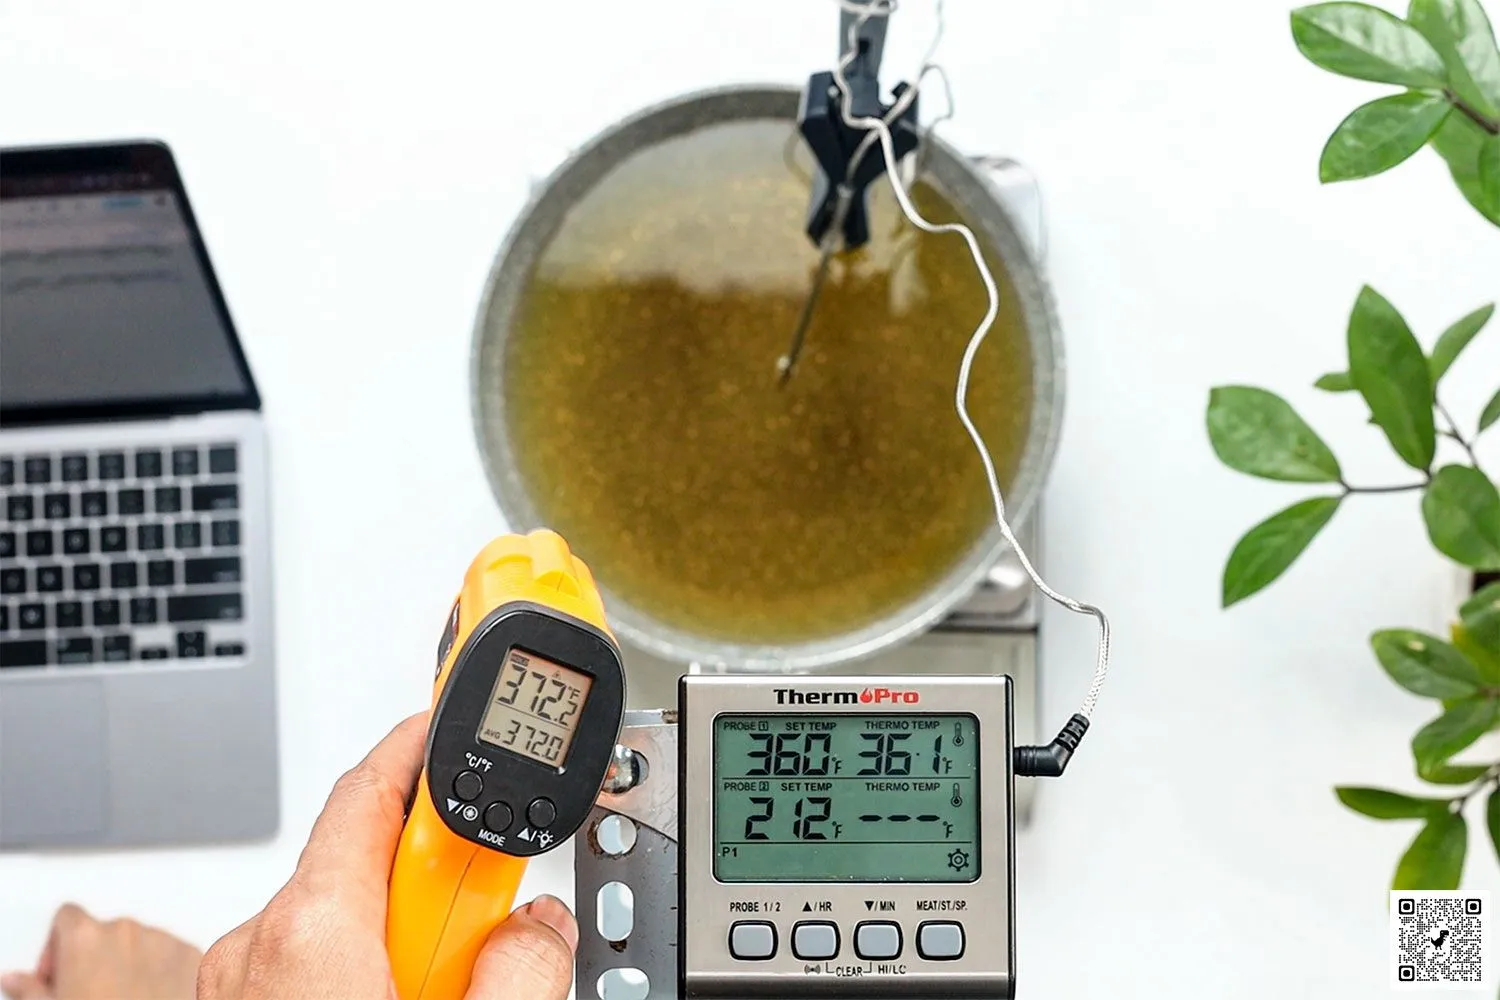 ThermoPro TP17 Dual Probe Cooking Meat Thermometer